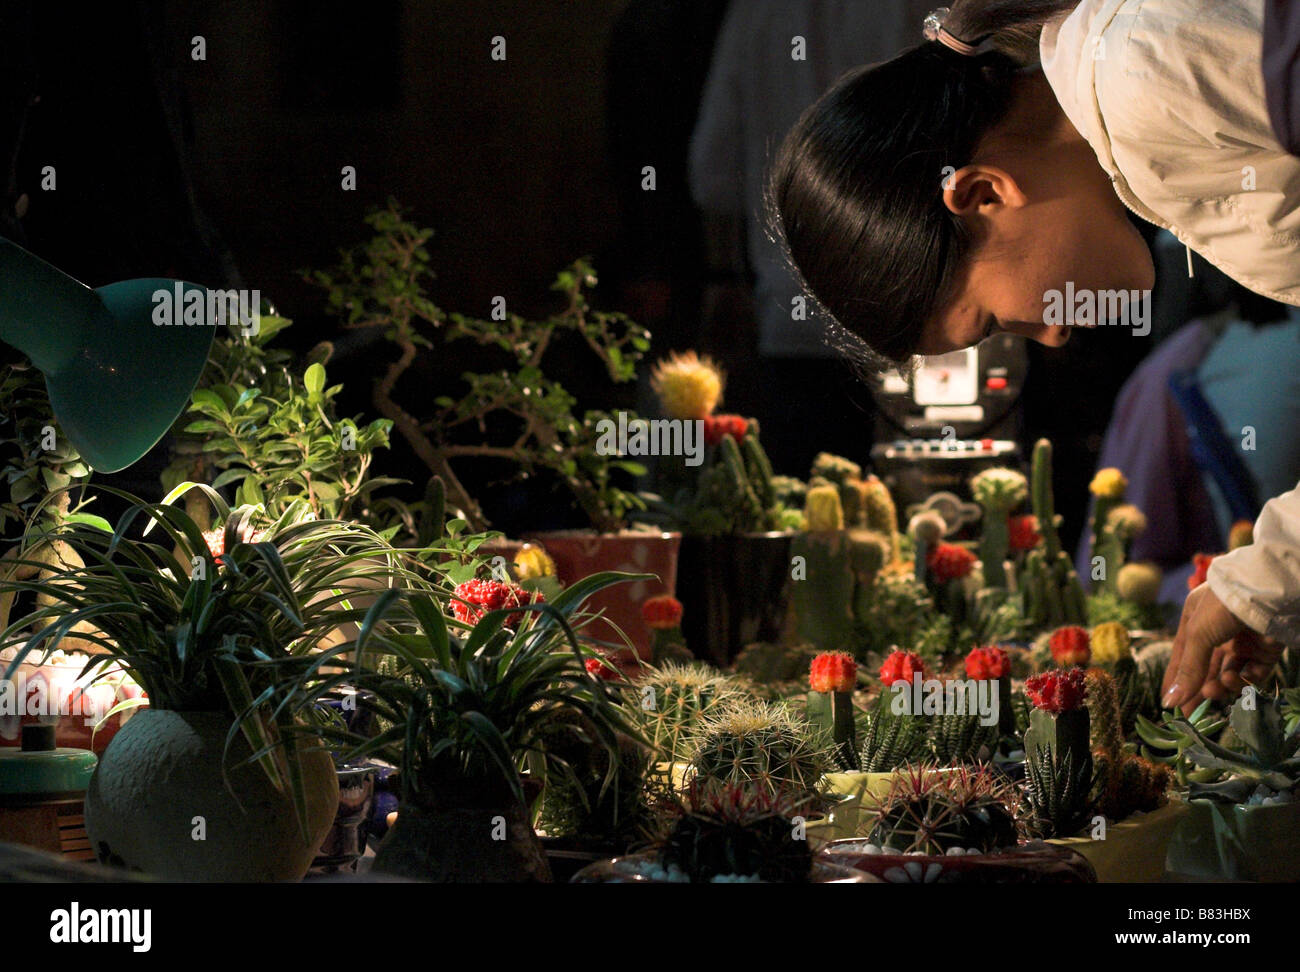 A women looking at some cactis plants that are for sale Stock Photo